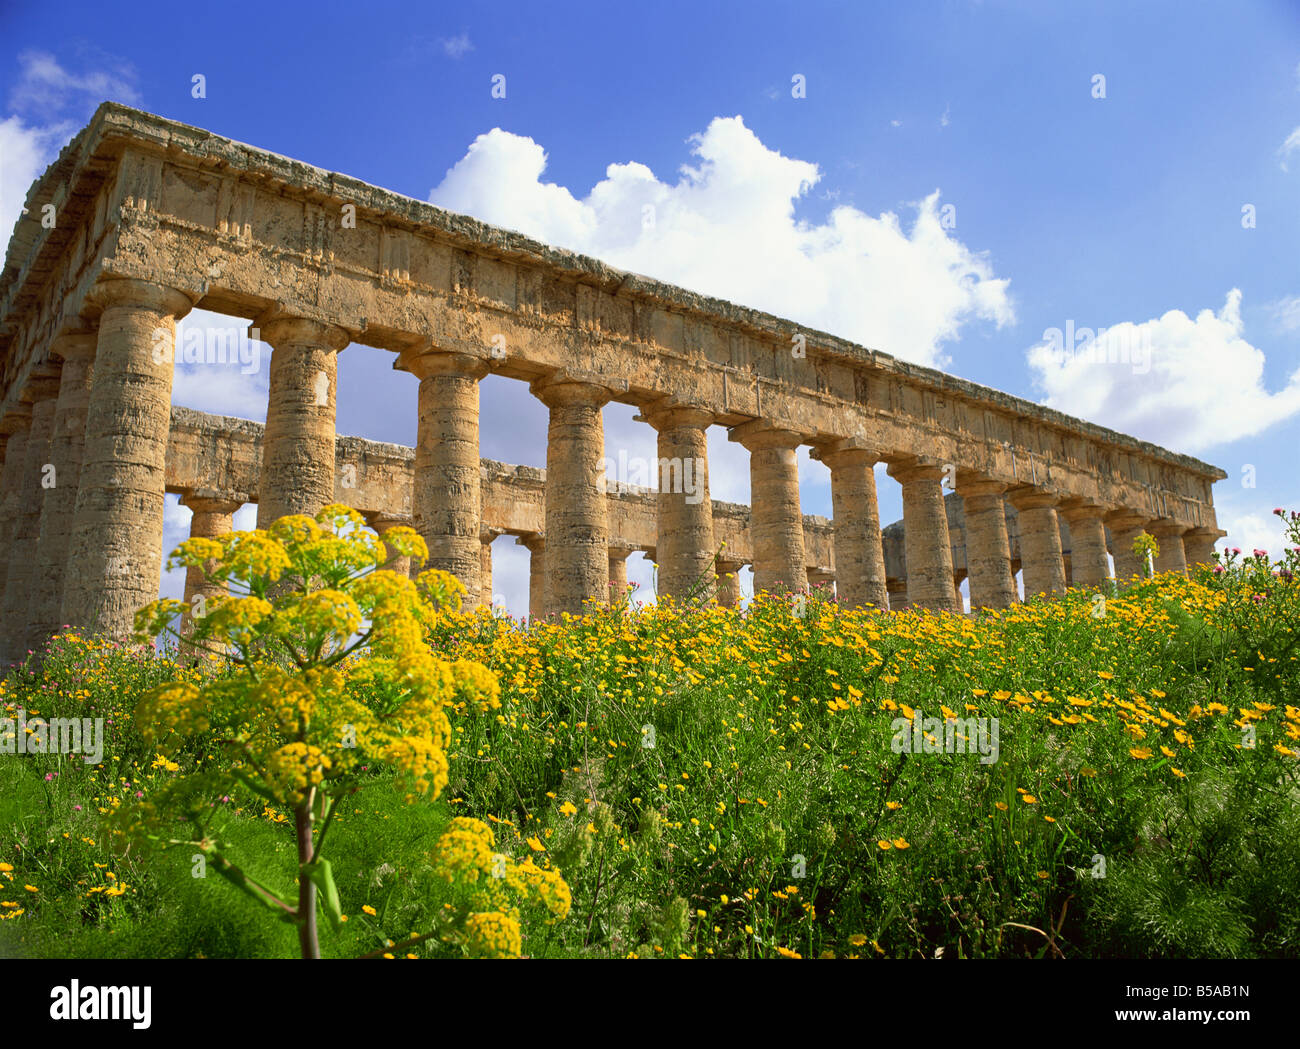 Temple of Segesta dating from between 420 and 430 BC near Catalfimi Alcamo Sicily Italy Europe Stock Photo